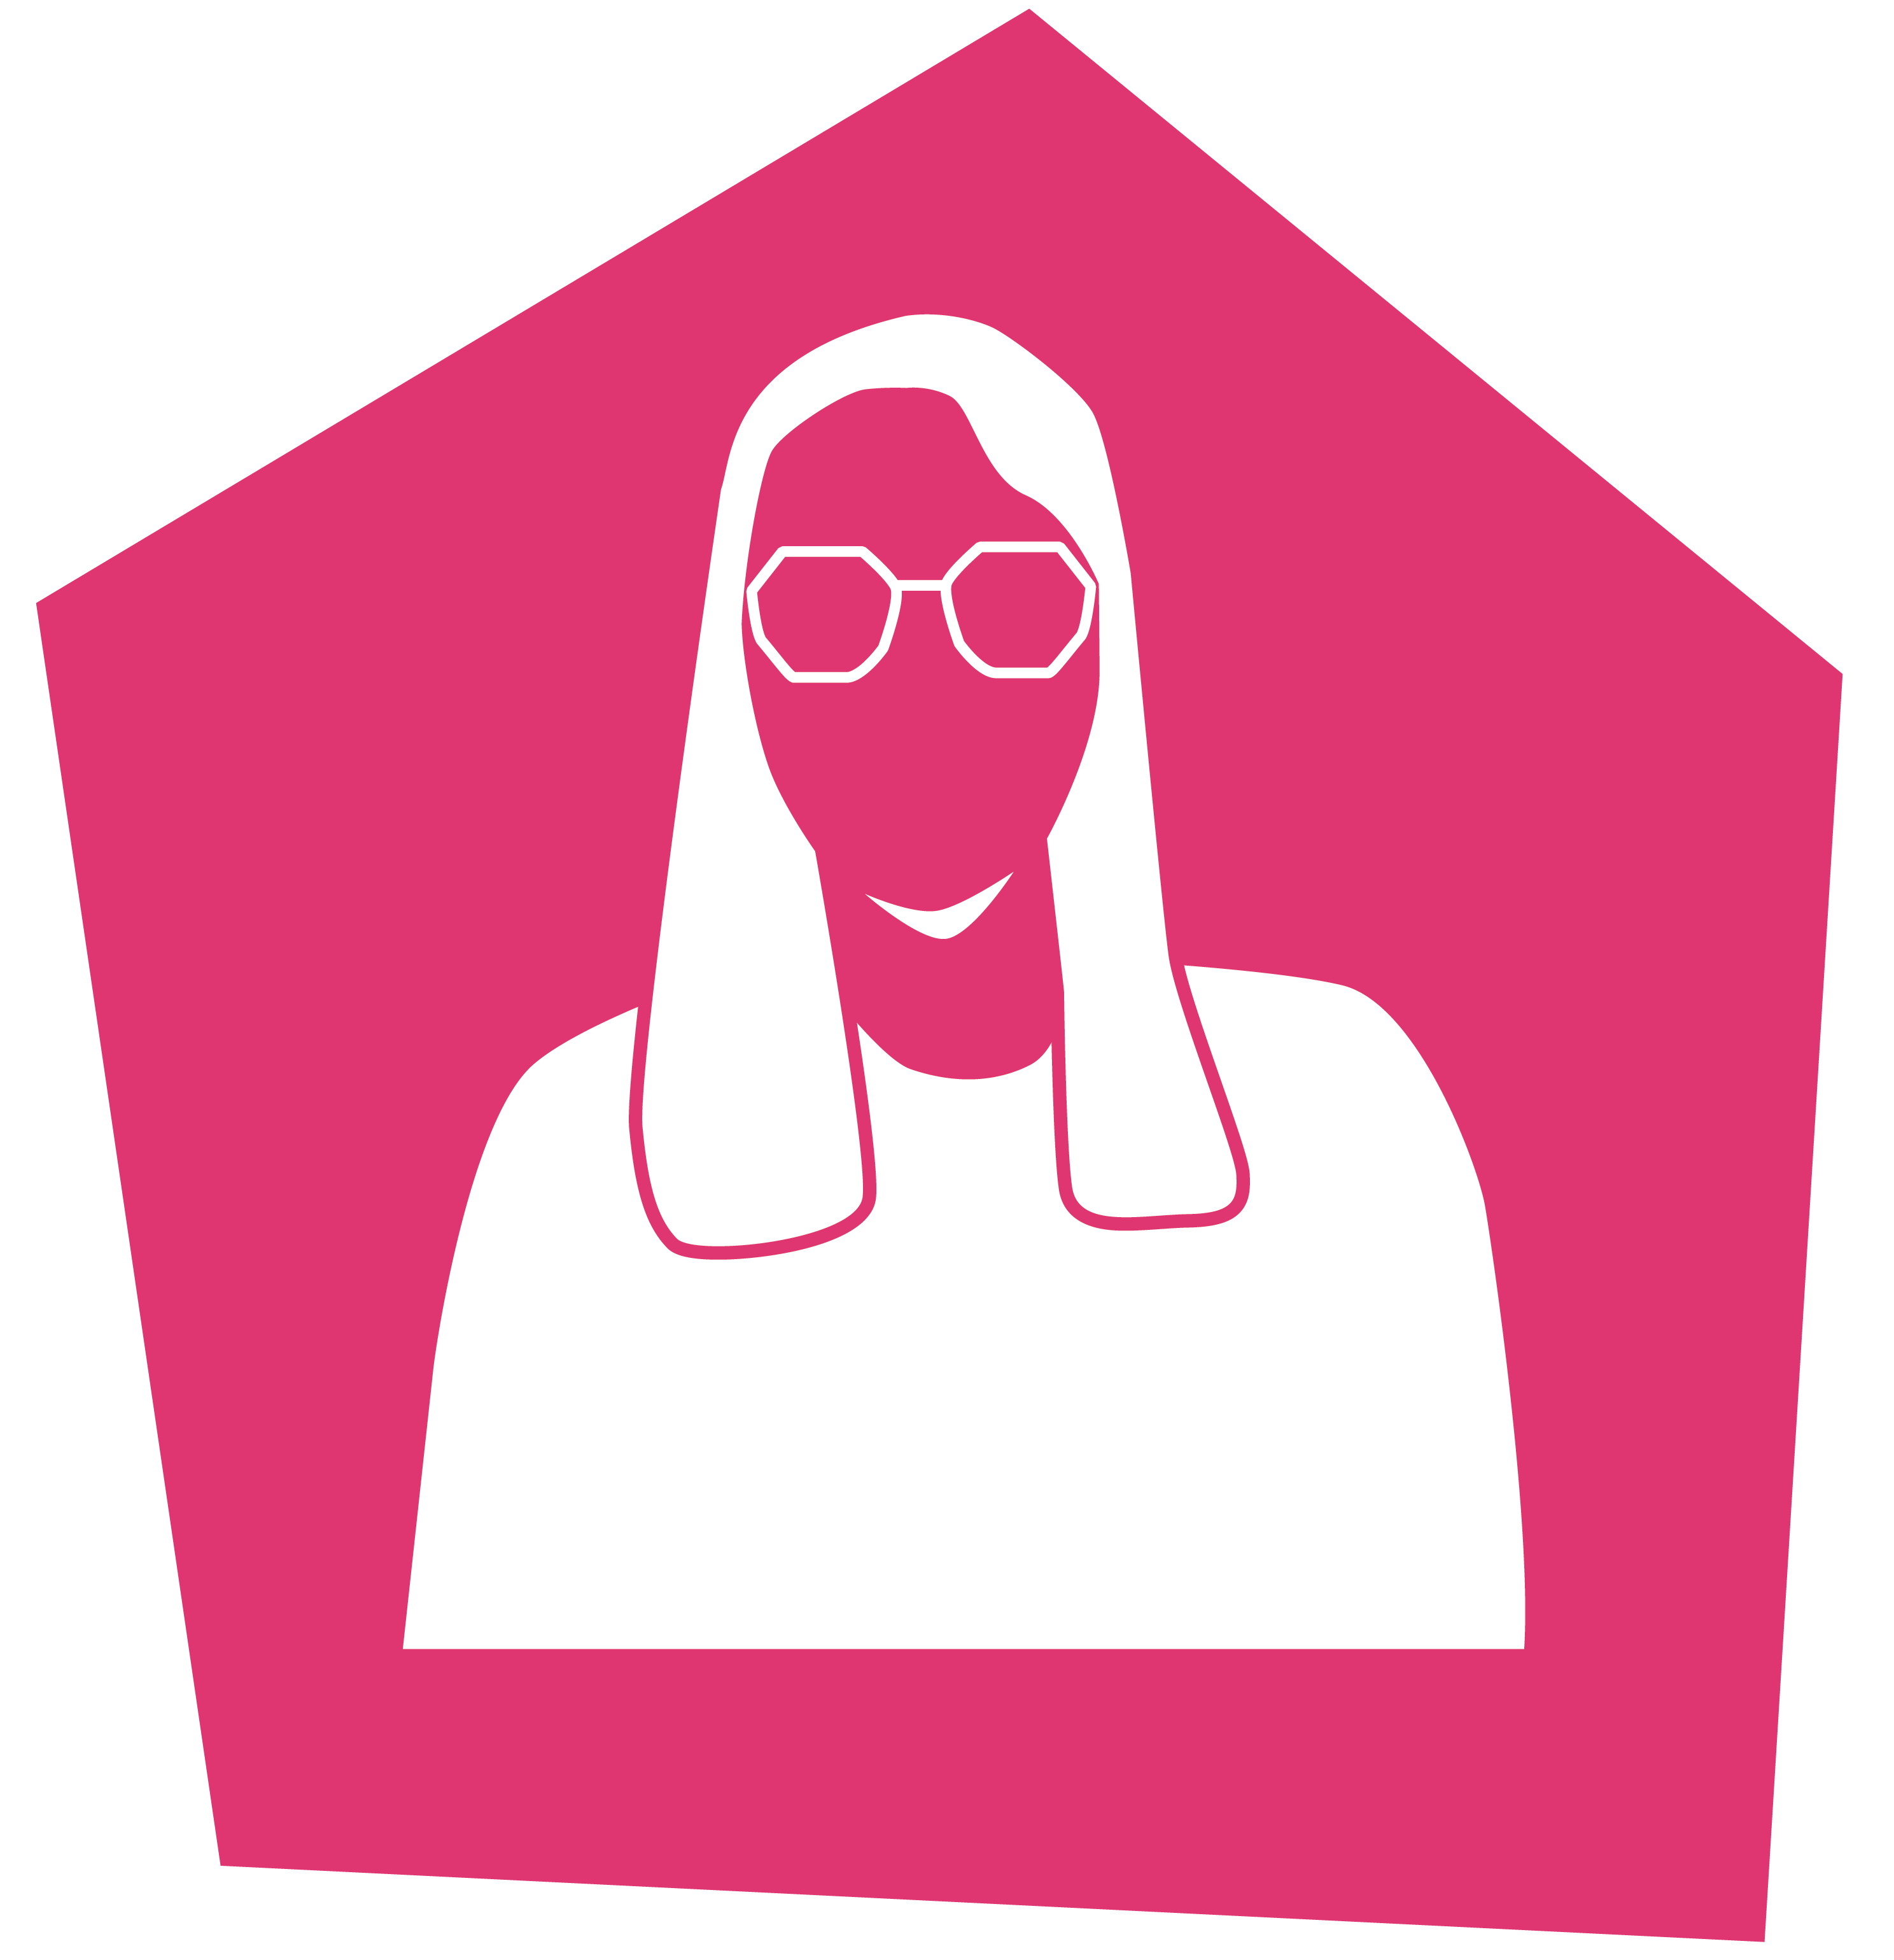 Logo image showing a pink silhouette of a girl